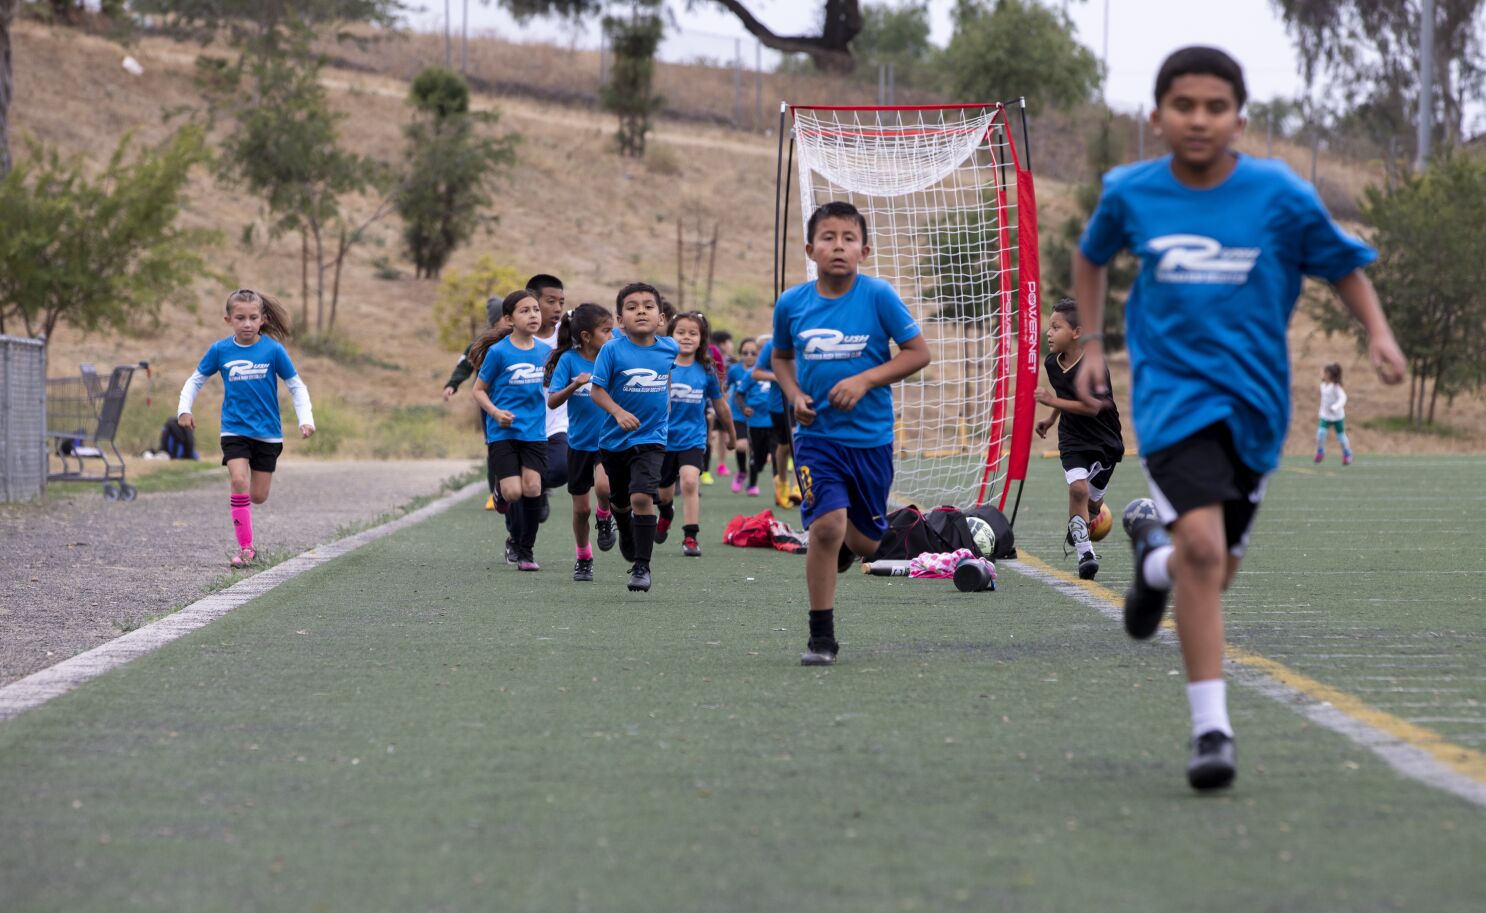 There are little leagues and football clubs, but no soccer in National  City. This mother kickstarts one - The San Diego Union-Tribune